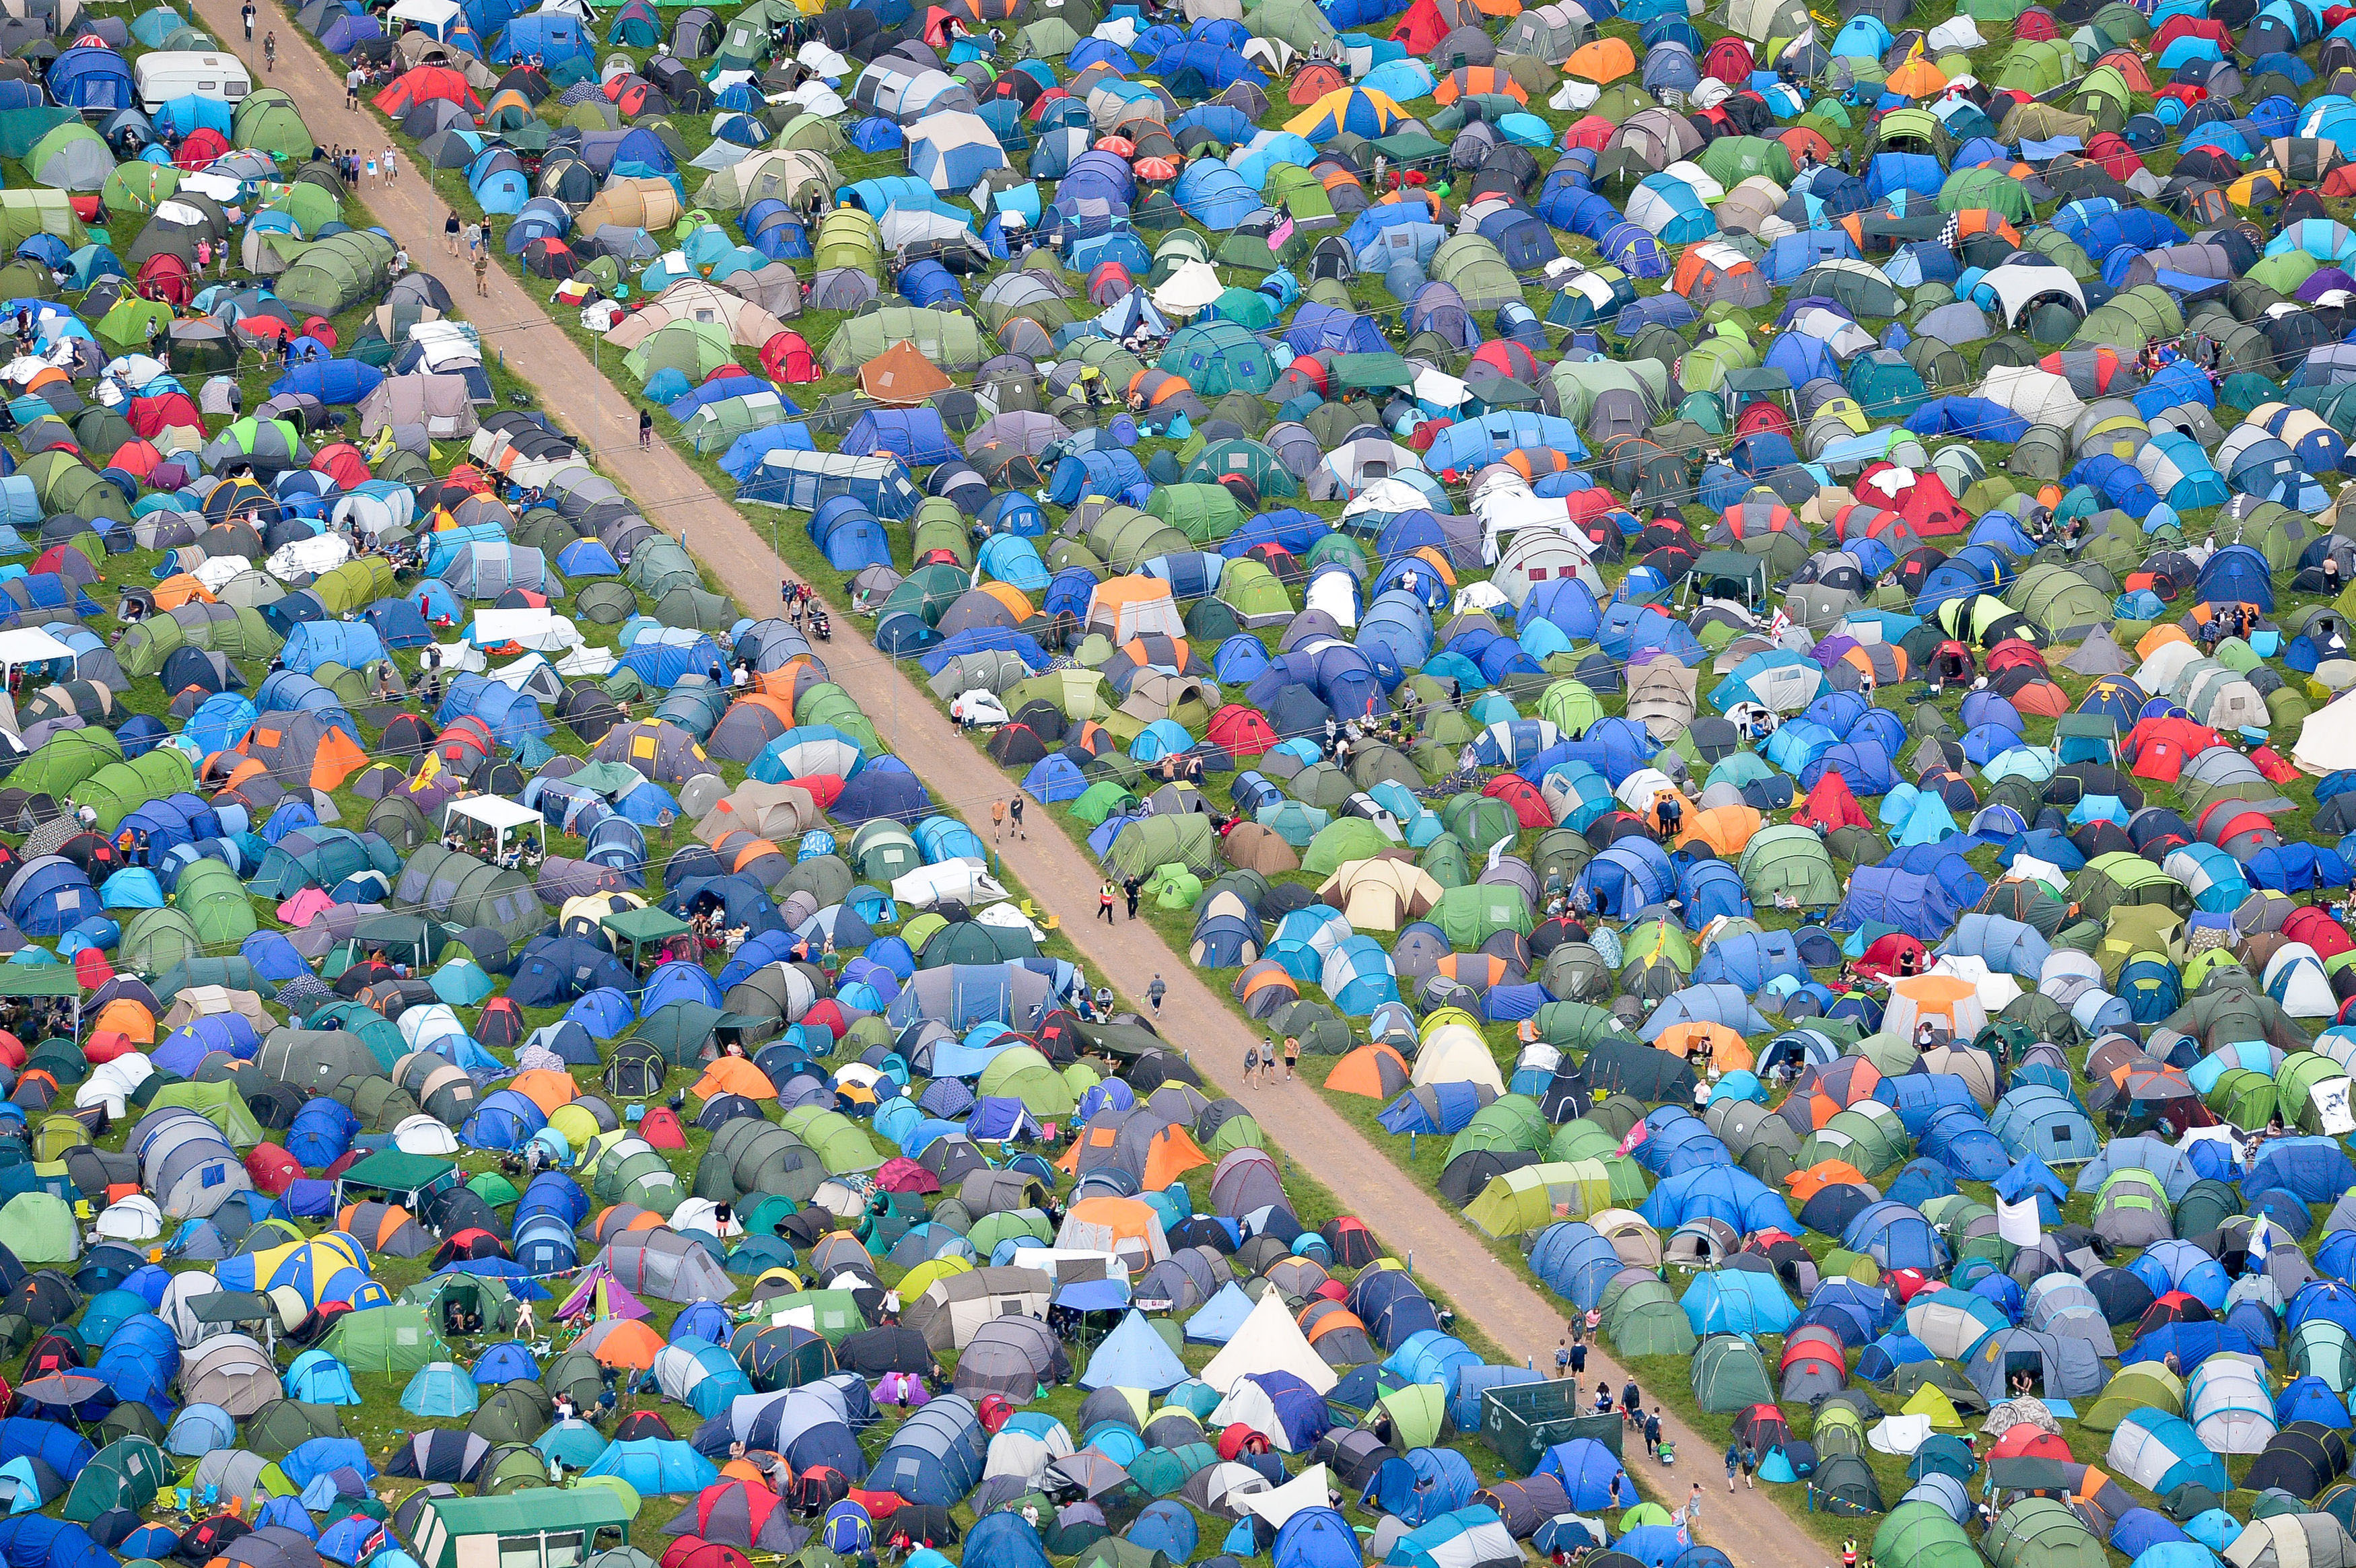 An aerial view of tents during the Glastonbury Festival at Worthy Farm in Pilton, Somerset (Ben Birchall/PA)